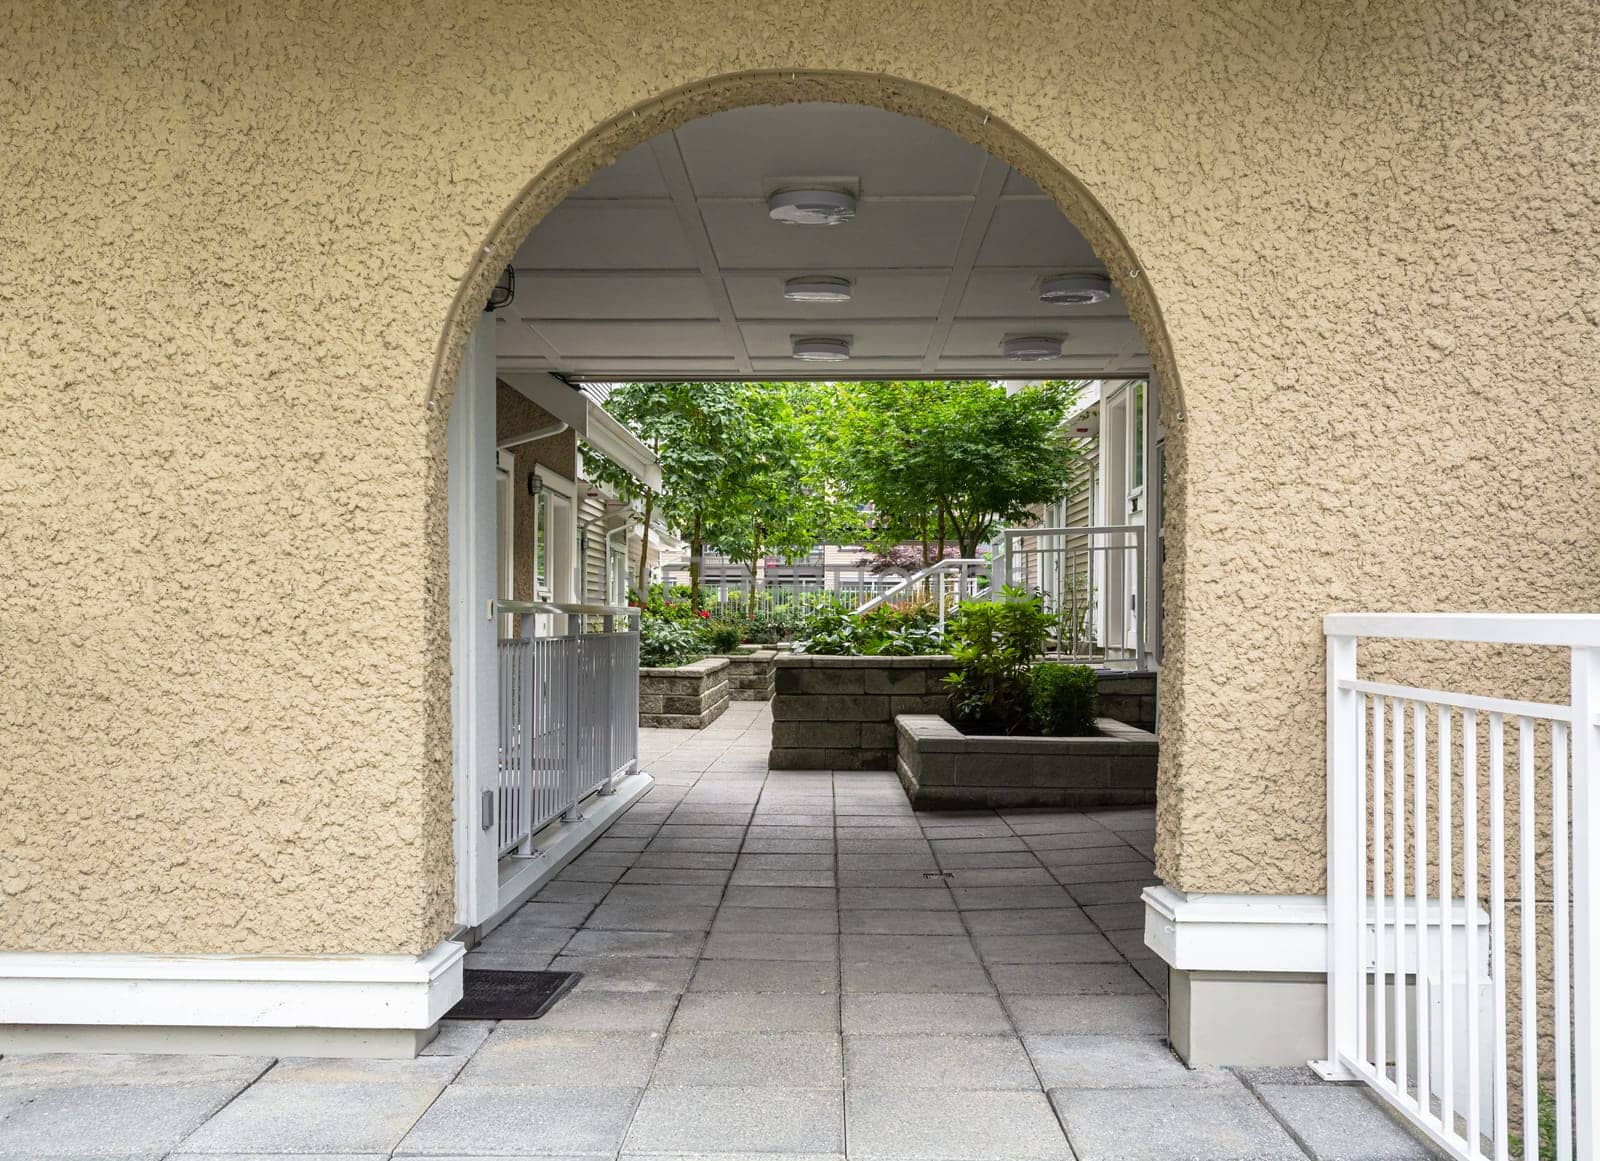 Entrance arch to inner yard of residential complex